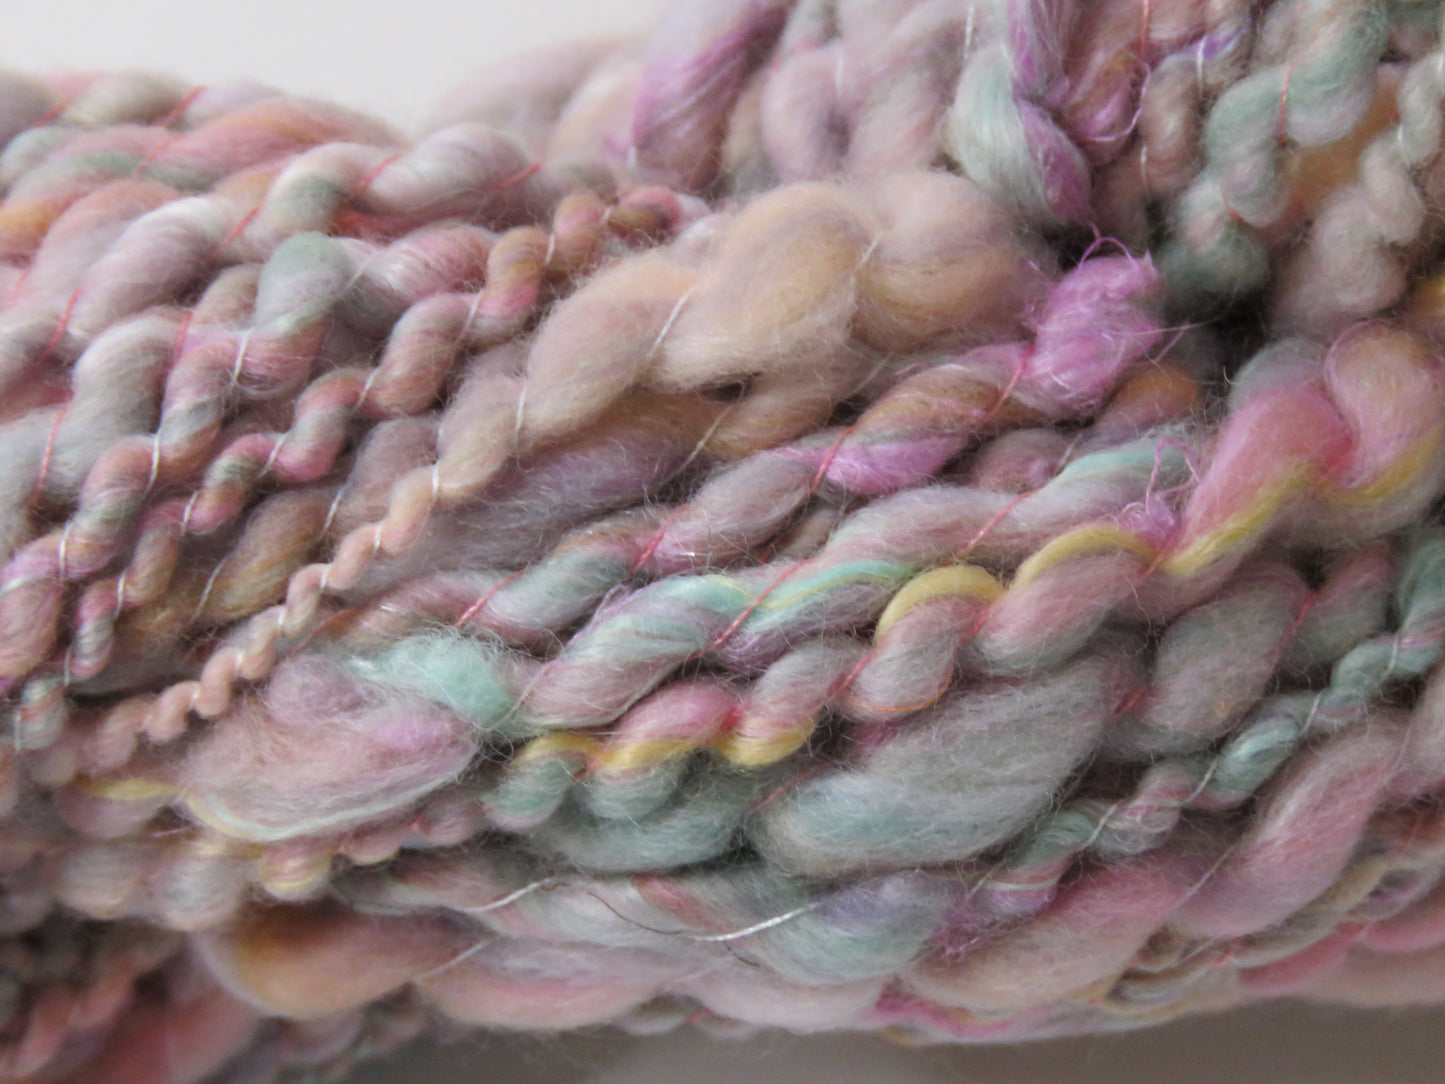 Yarn Y23103 Hand Spun Art Yarn, 2-ply thick and thin spiral plied with thread